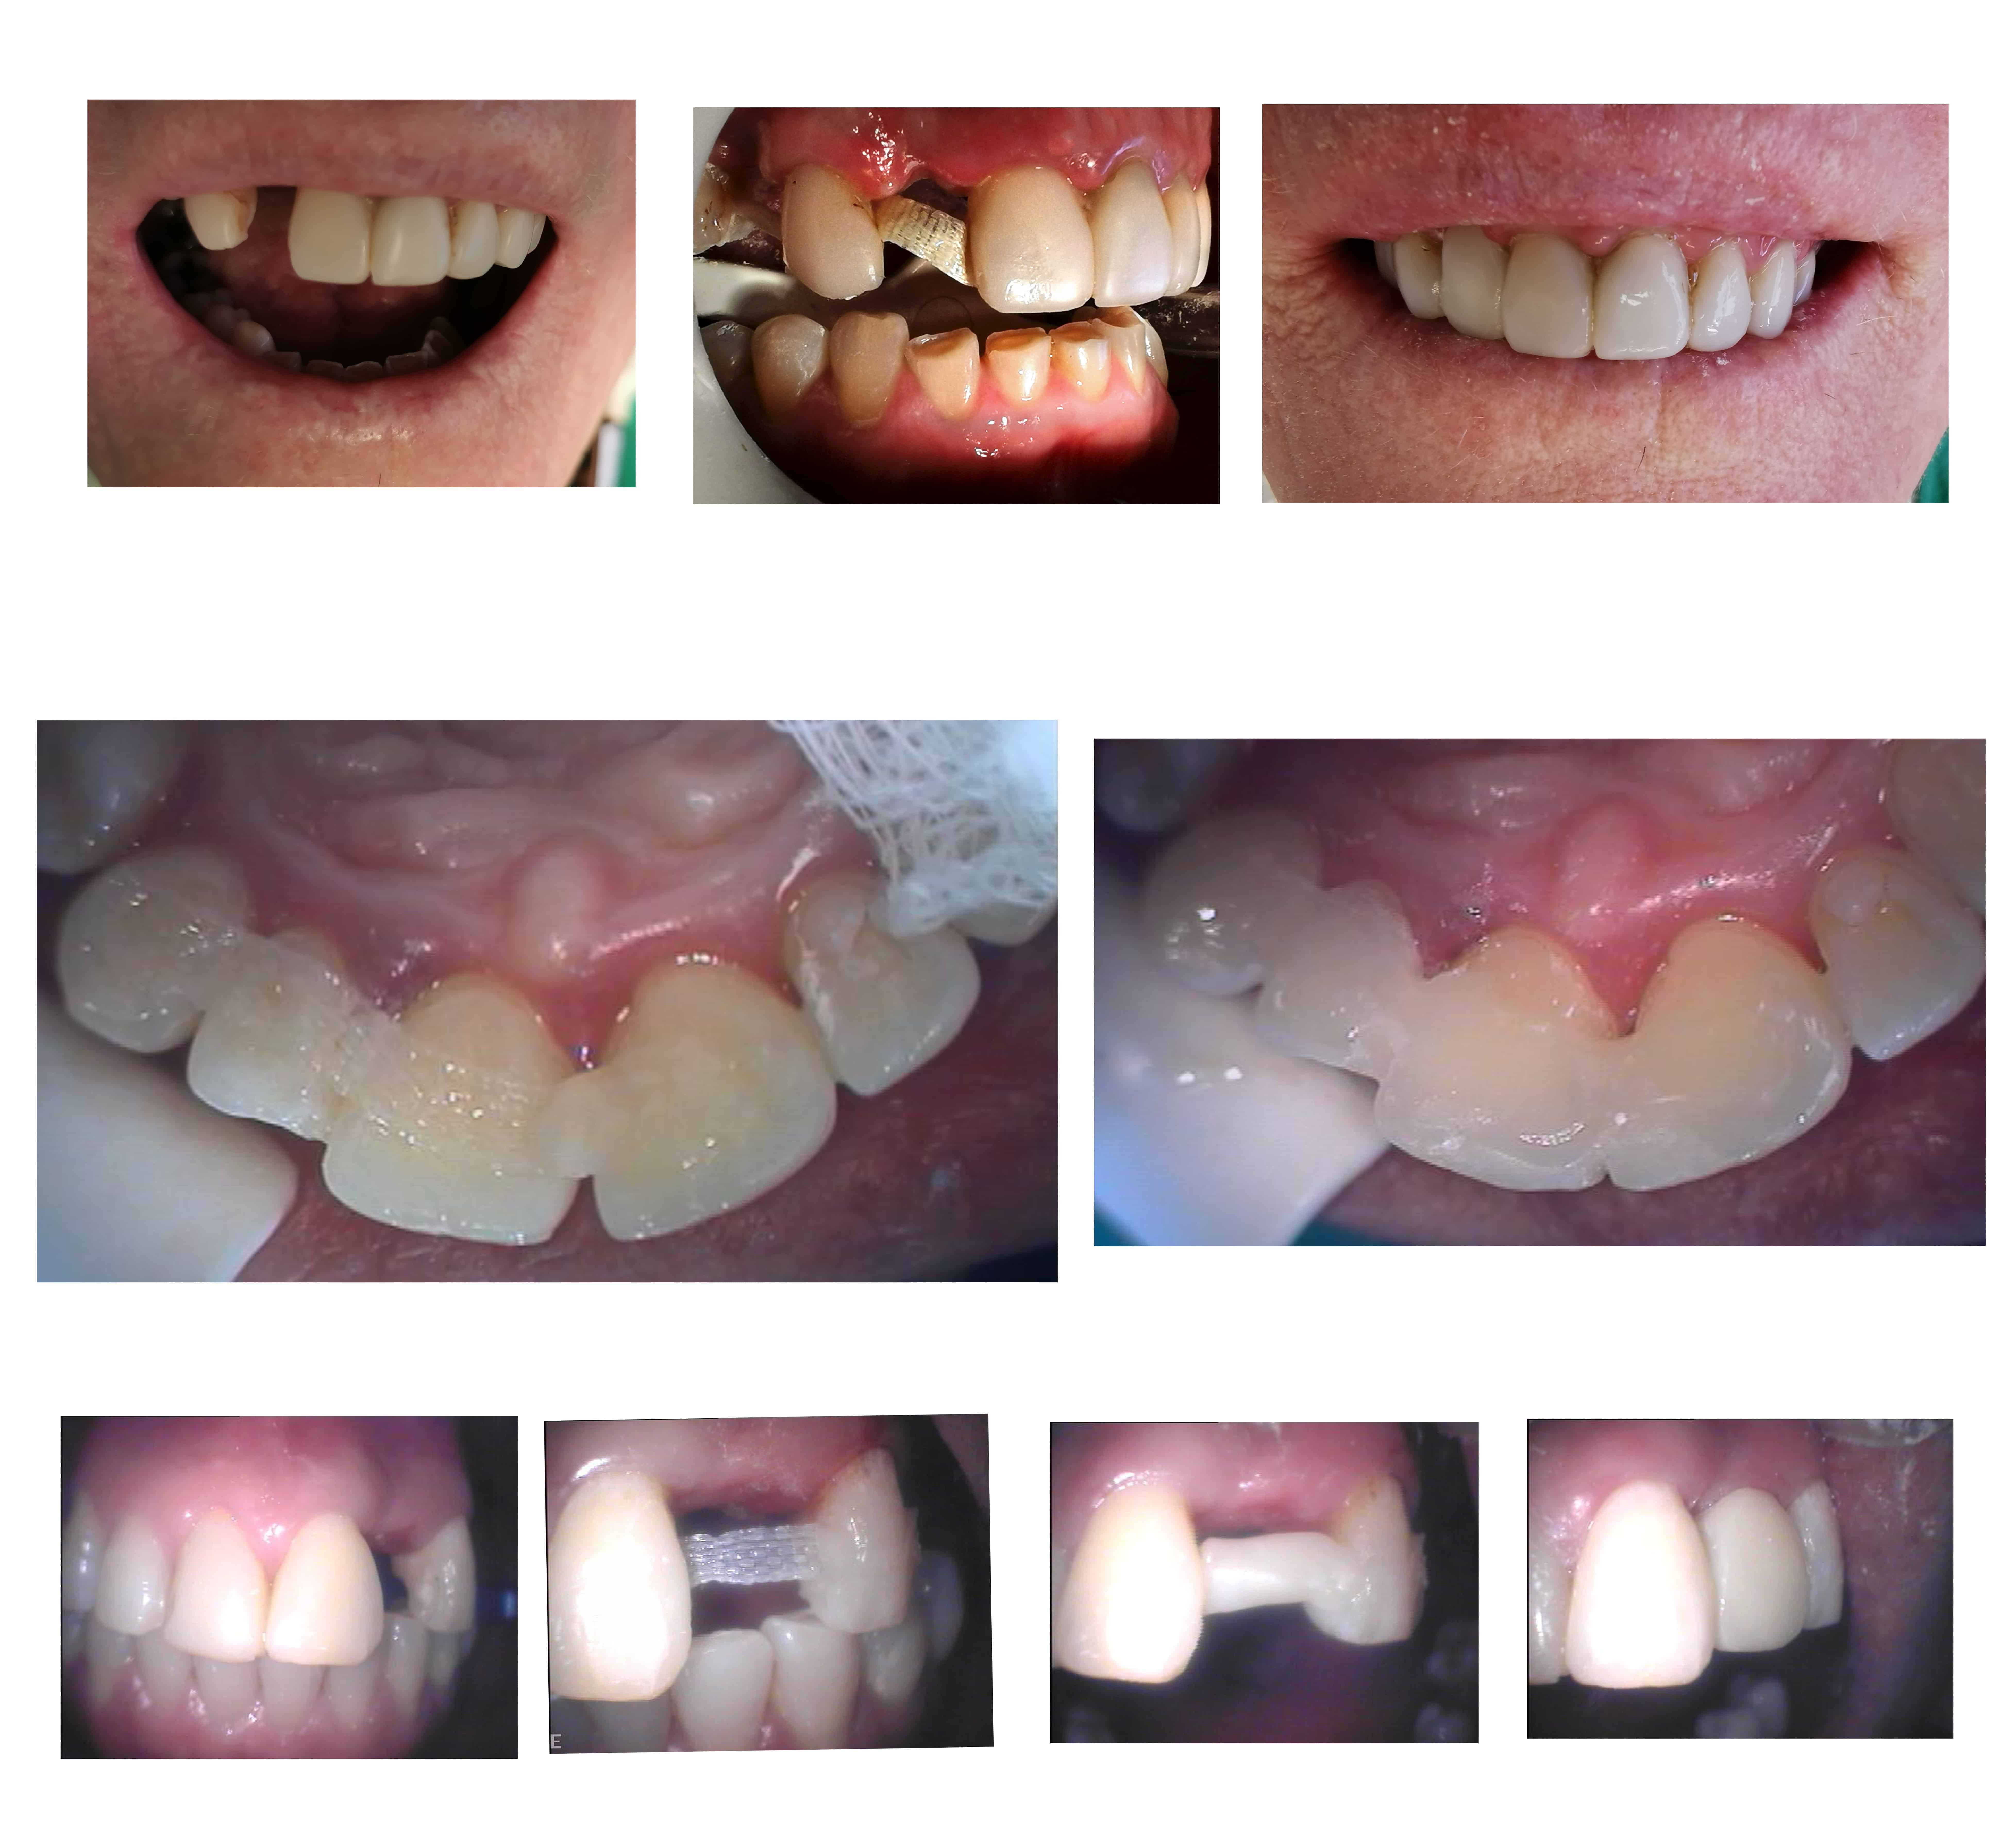 Least Expensive Smile Makeover option in Melbourne - cheapest way to improve smile 